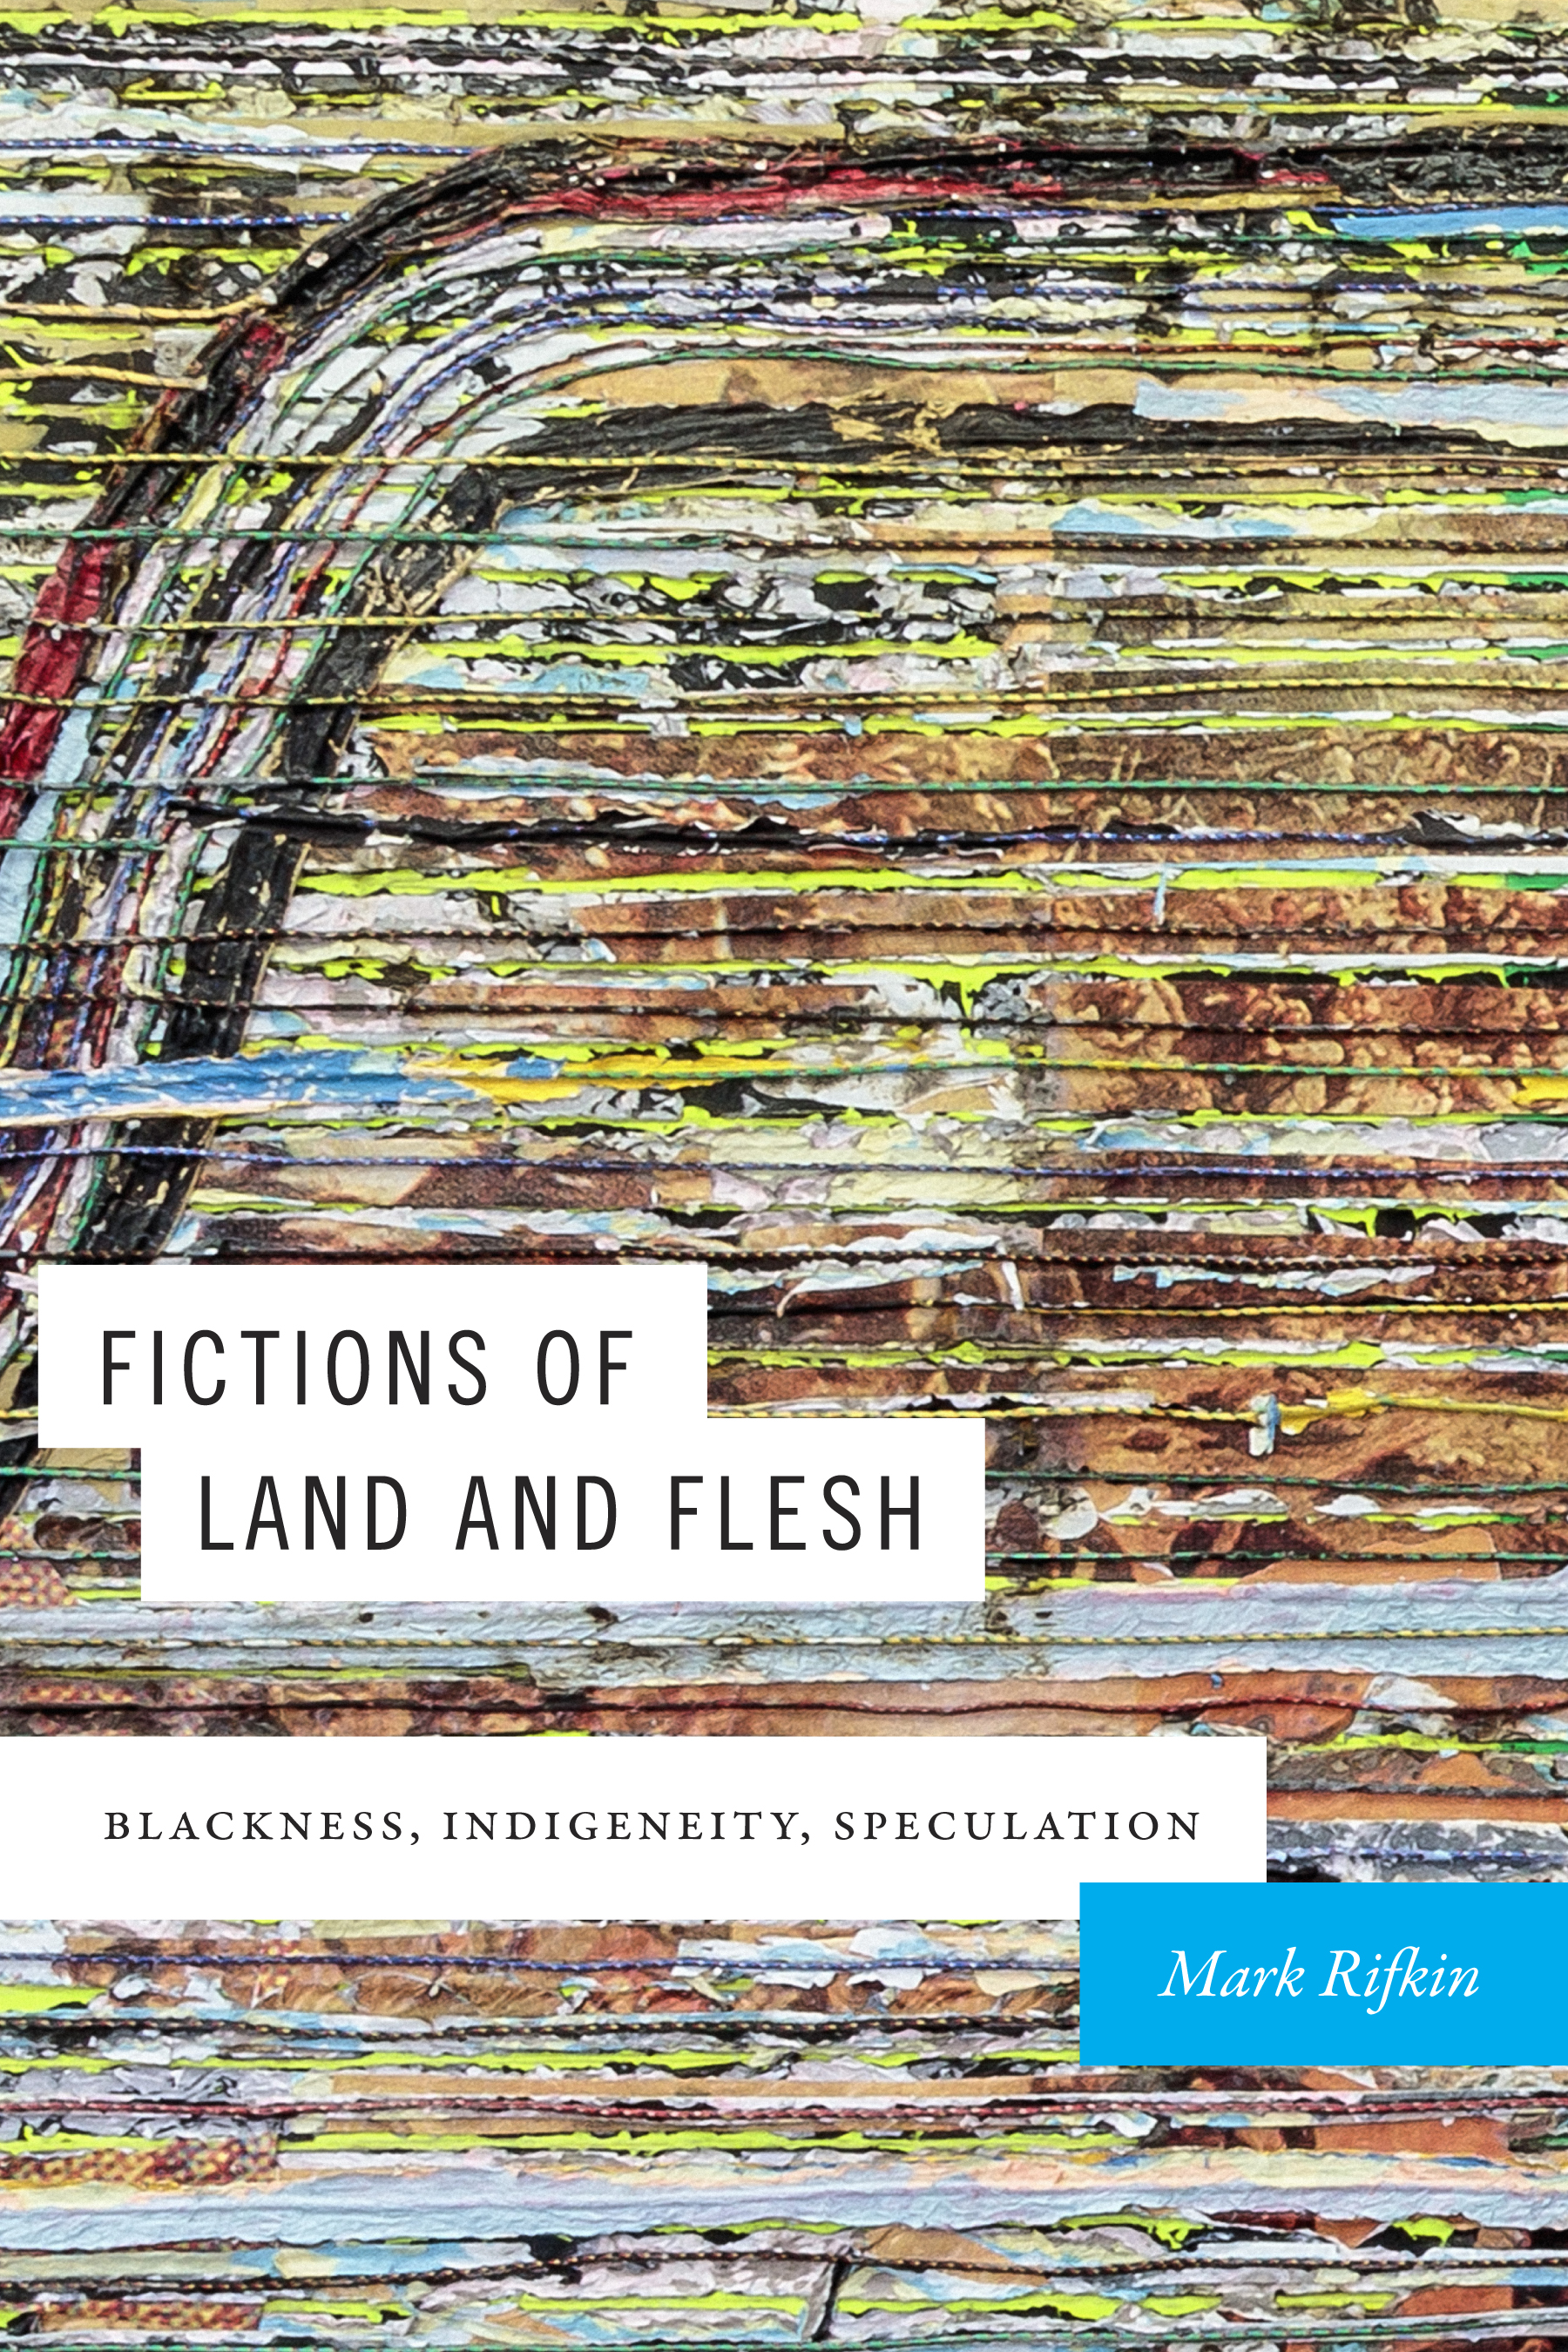 Fictions of Land and Flesh by Mark Rifkin